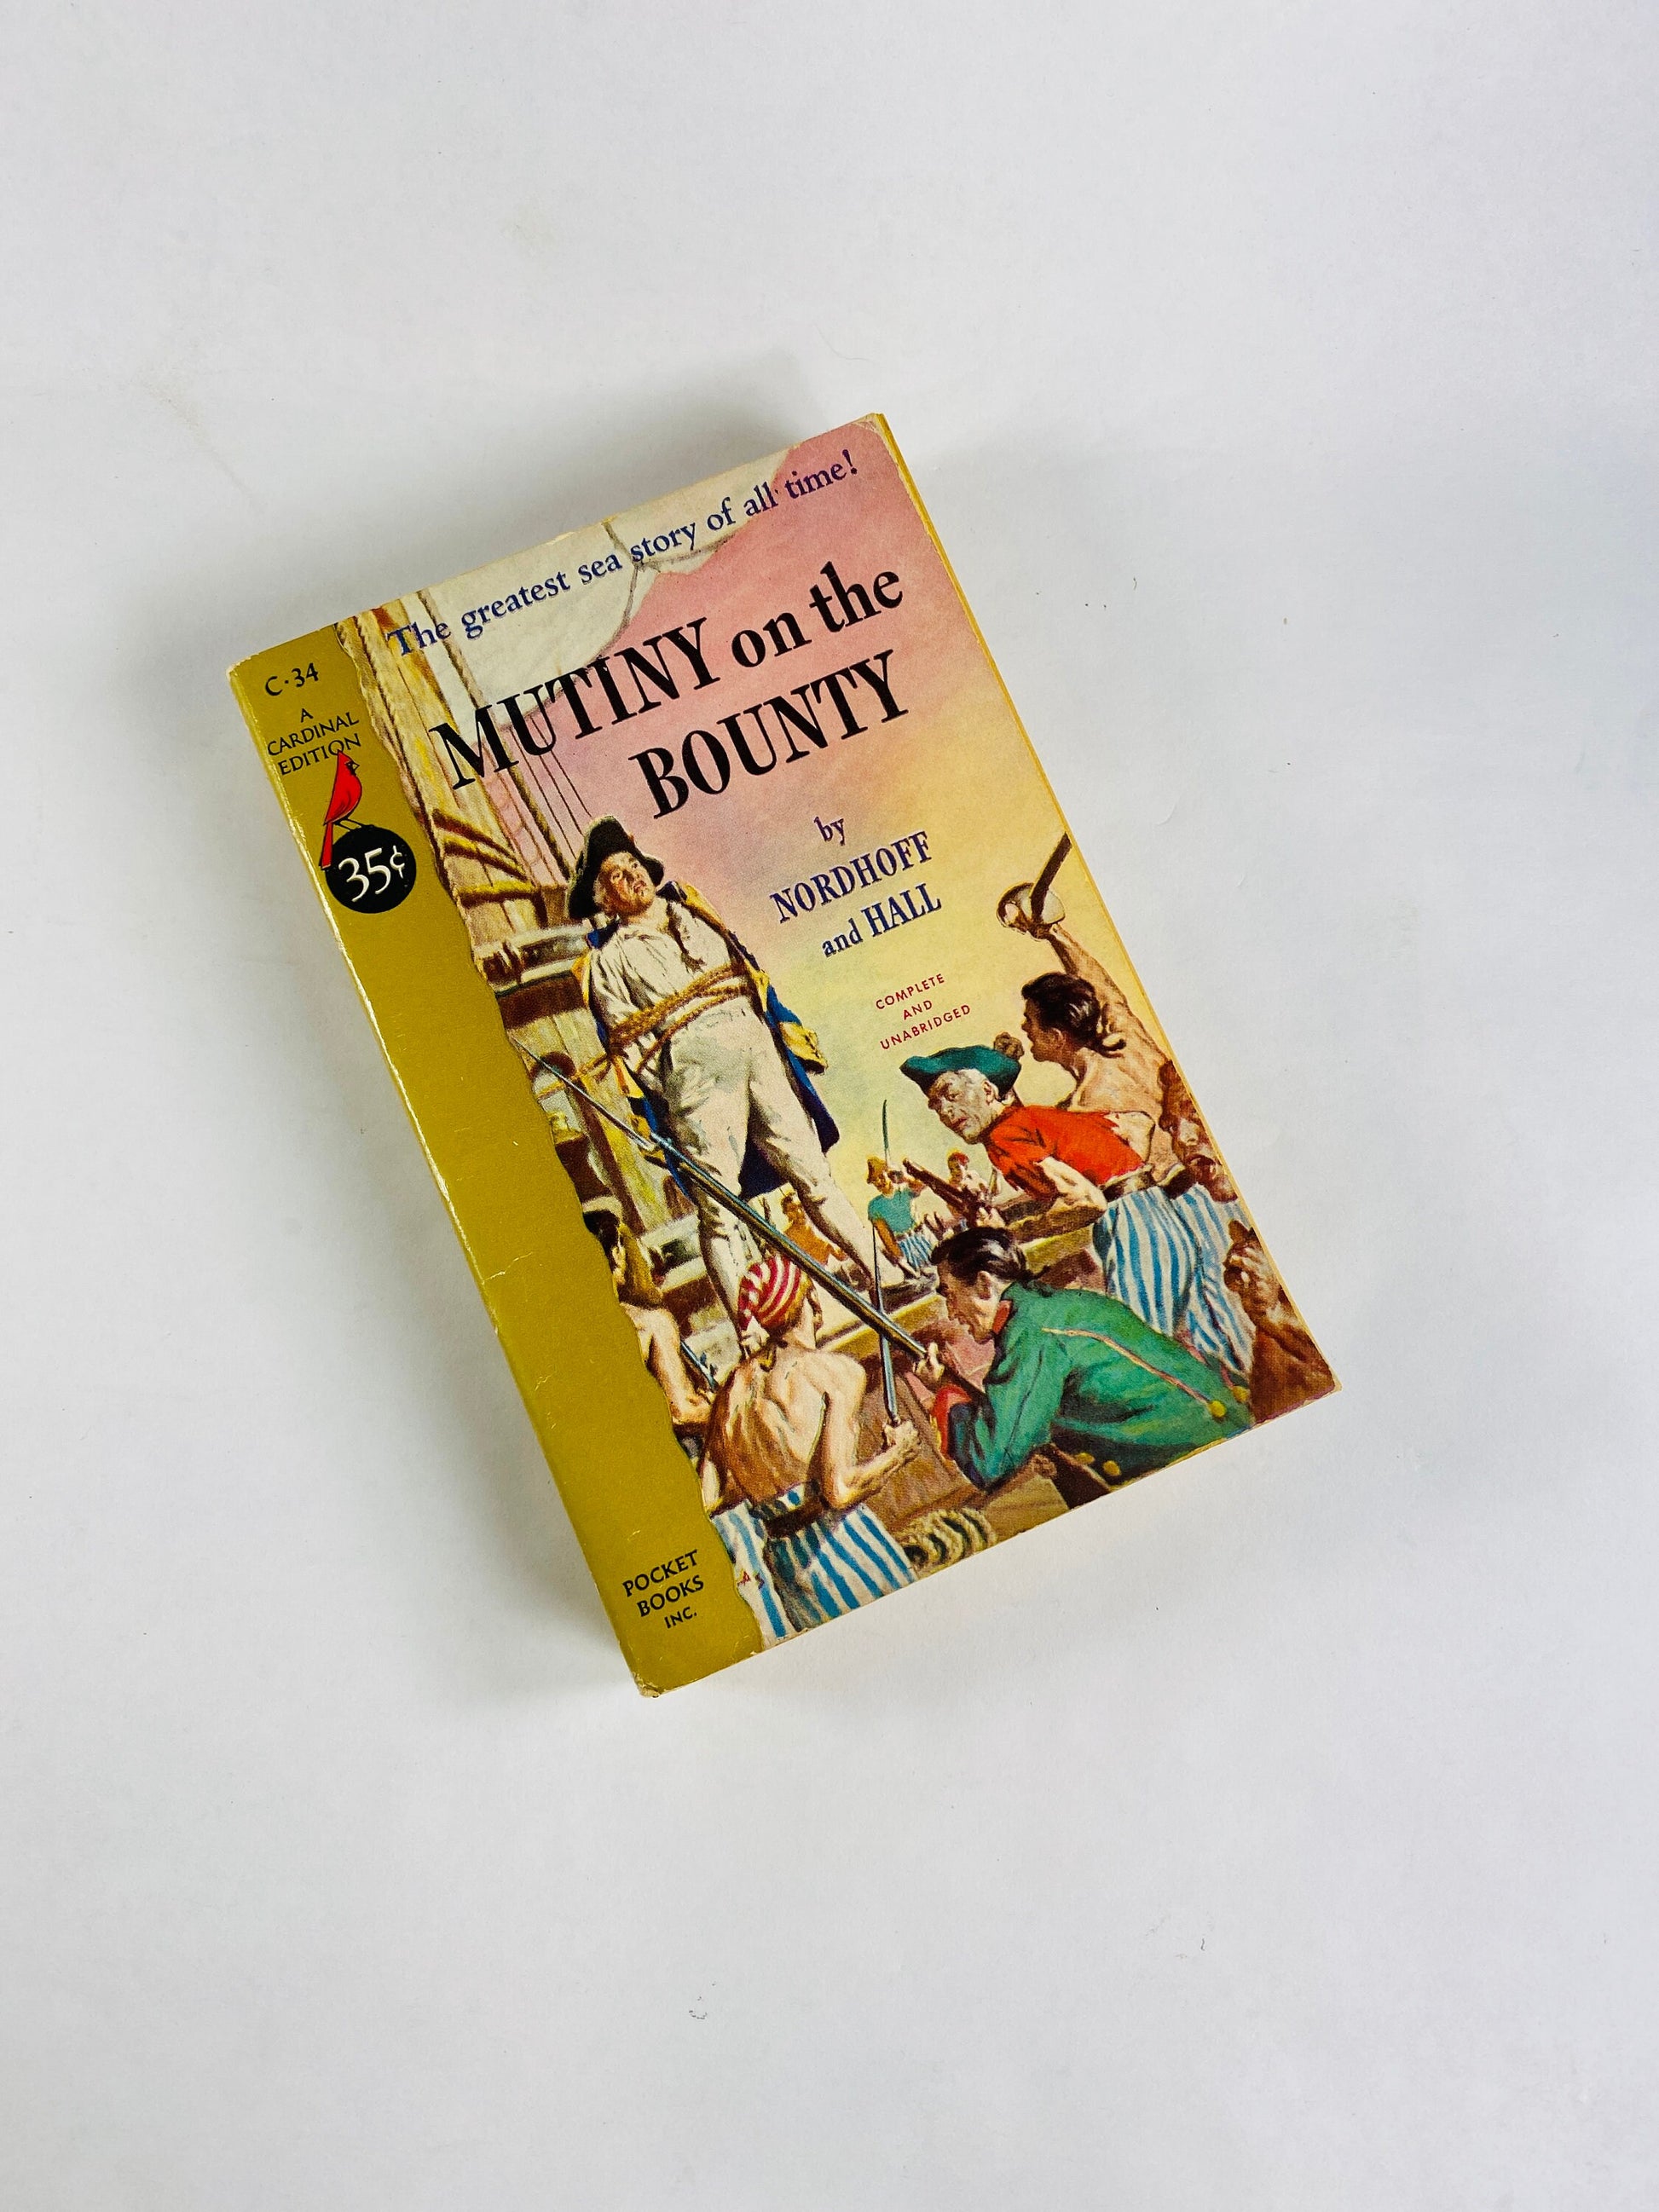 Mutiny on the Bounty by Charles Nordhoff and James Norman Hall vintage paperback book circa 1957 Pocket Cardinal basis of films and musical